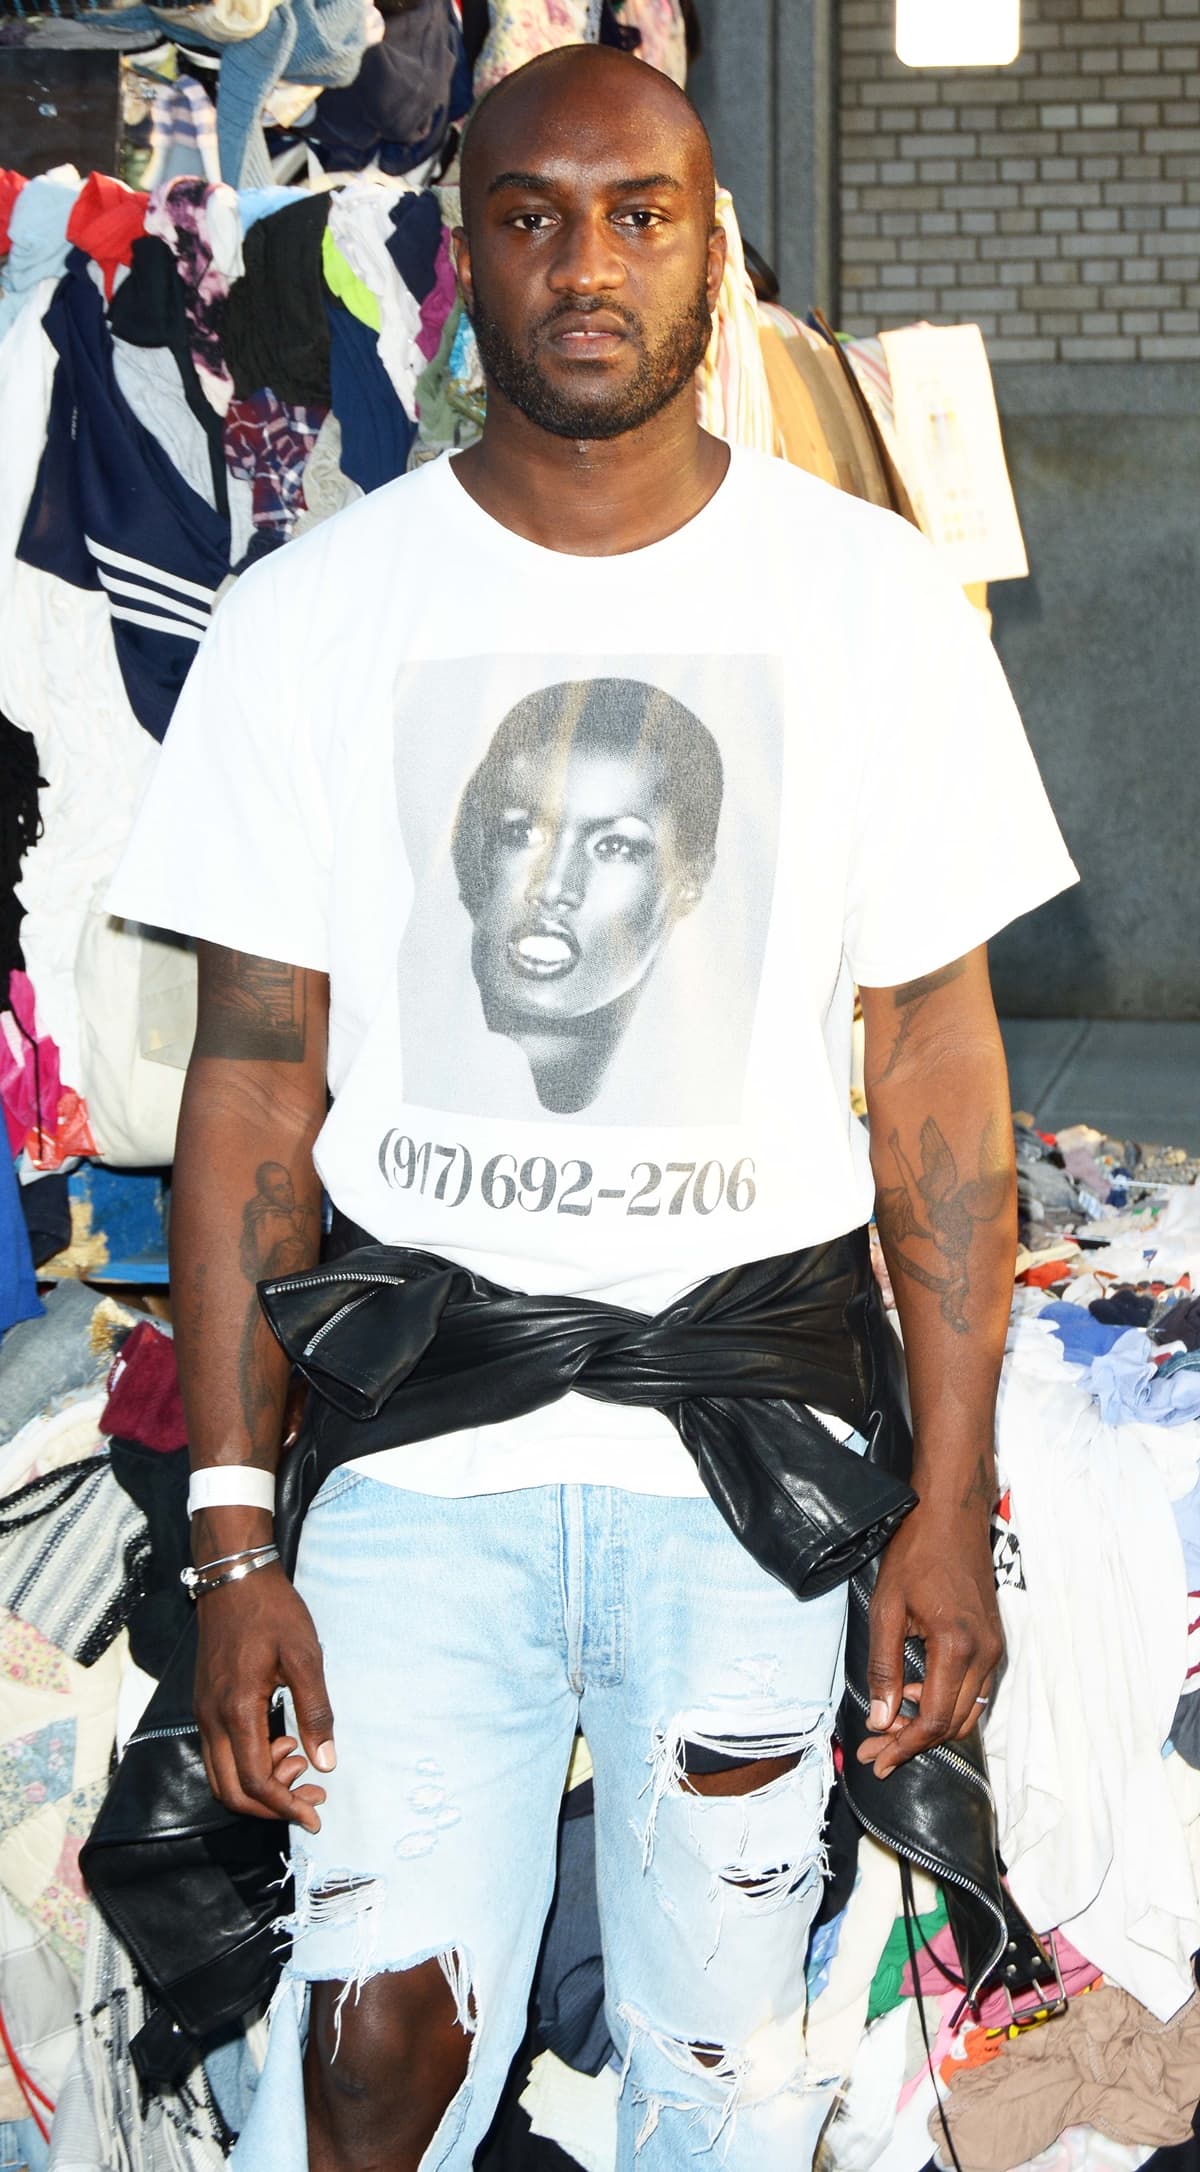 Virgil Abloh founded Milan-based label Off-White in 2012 and was made the artistic director of Louis Vuitton's menswear collection from 2018